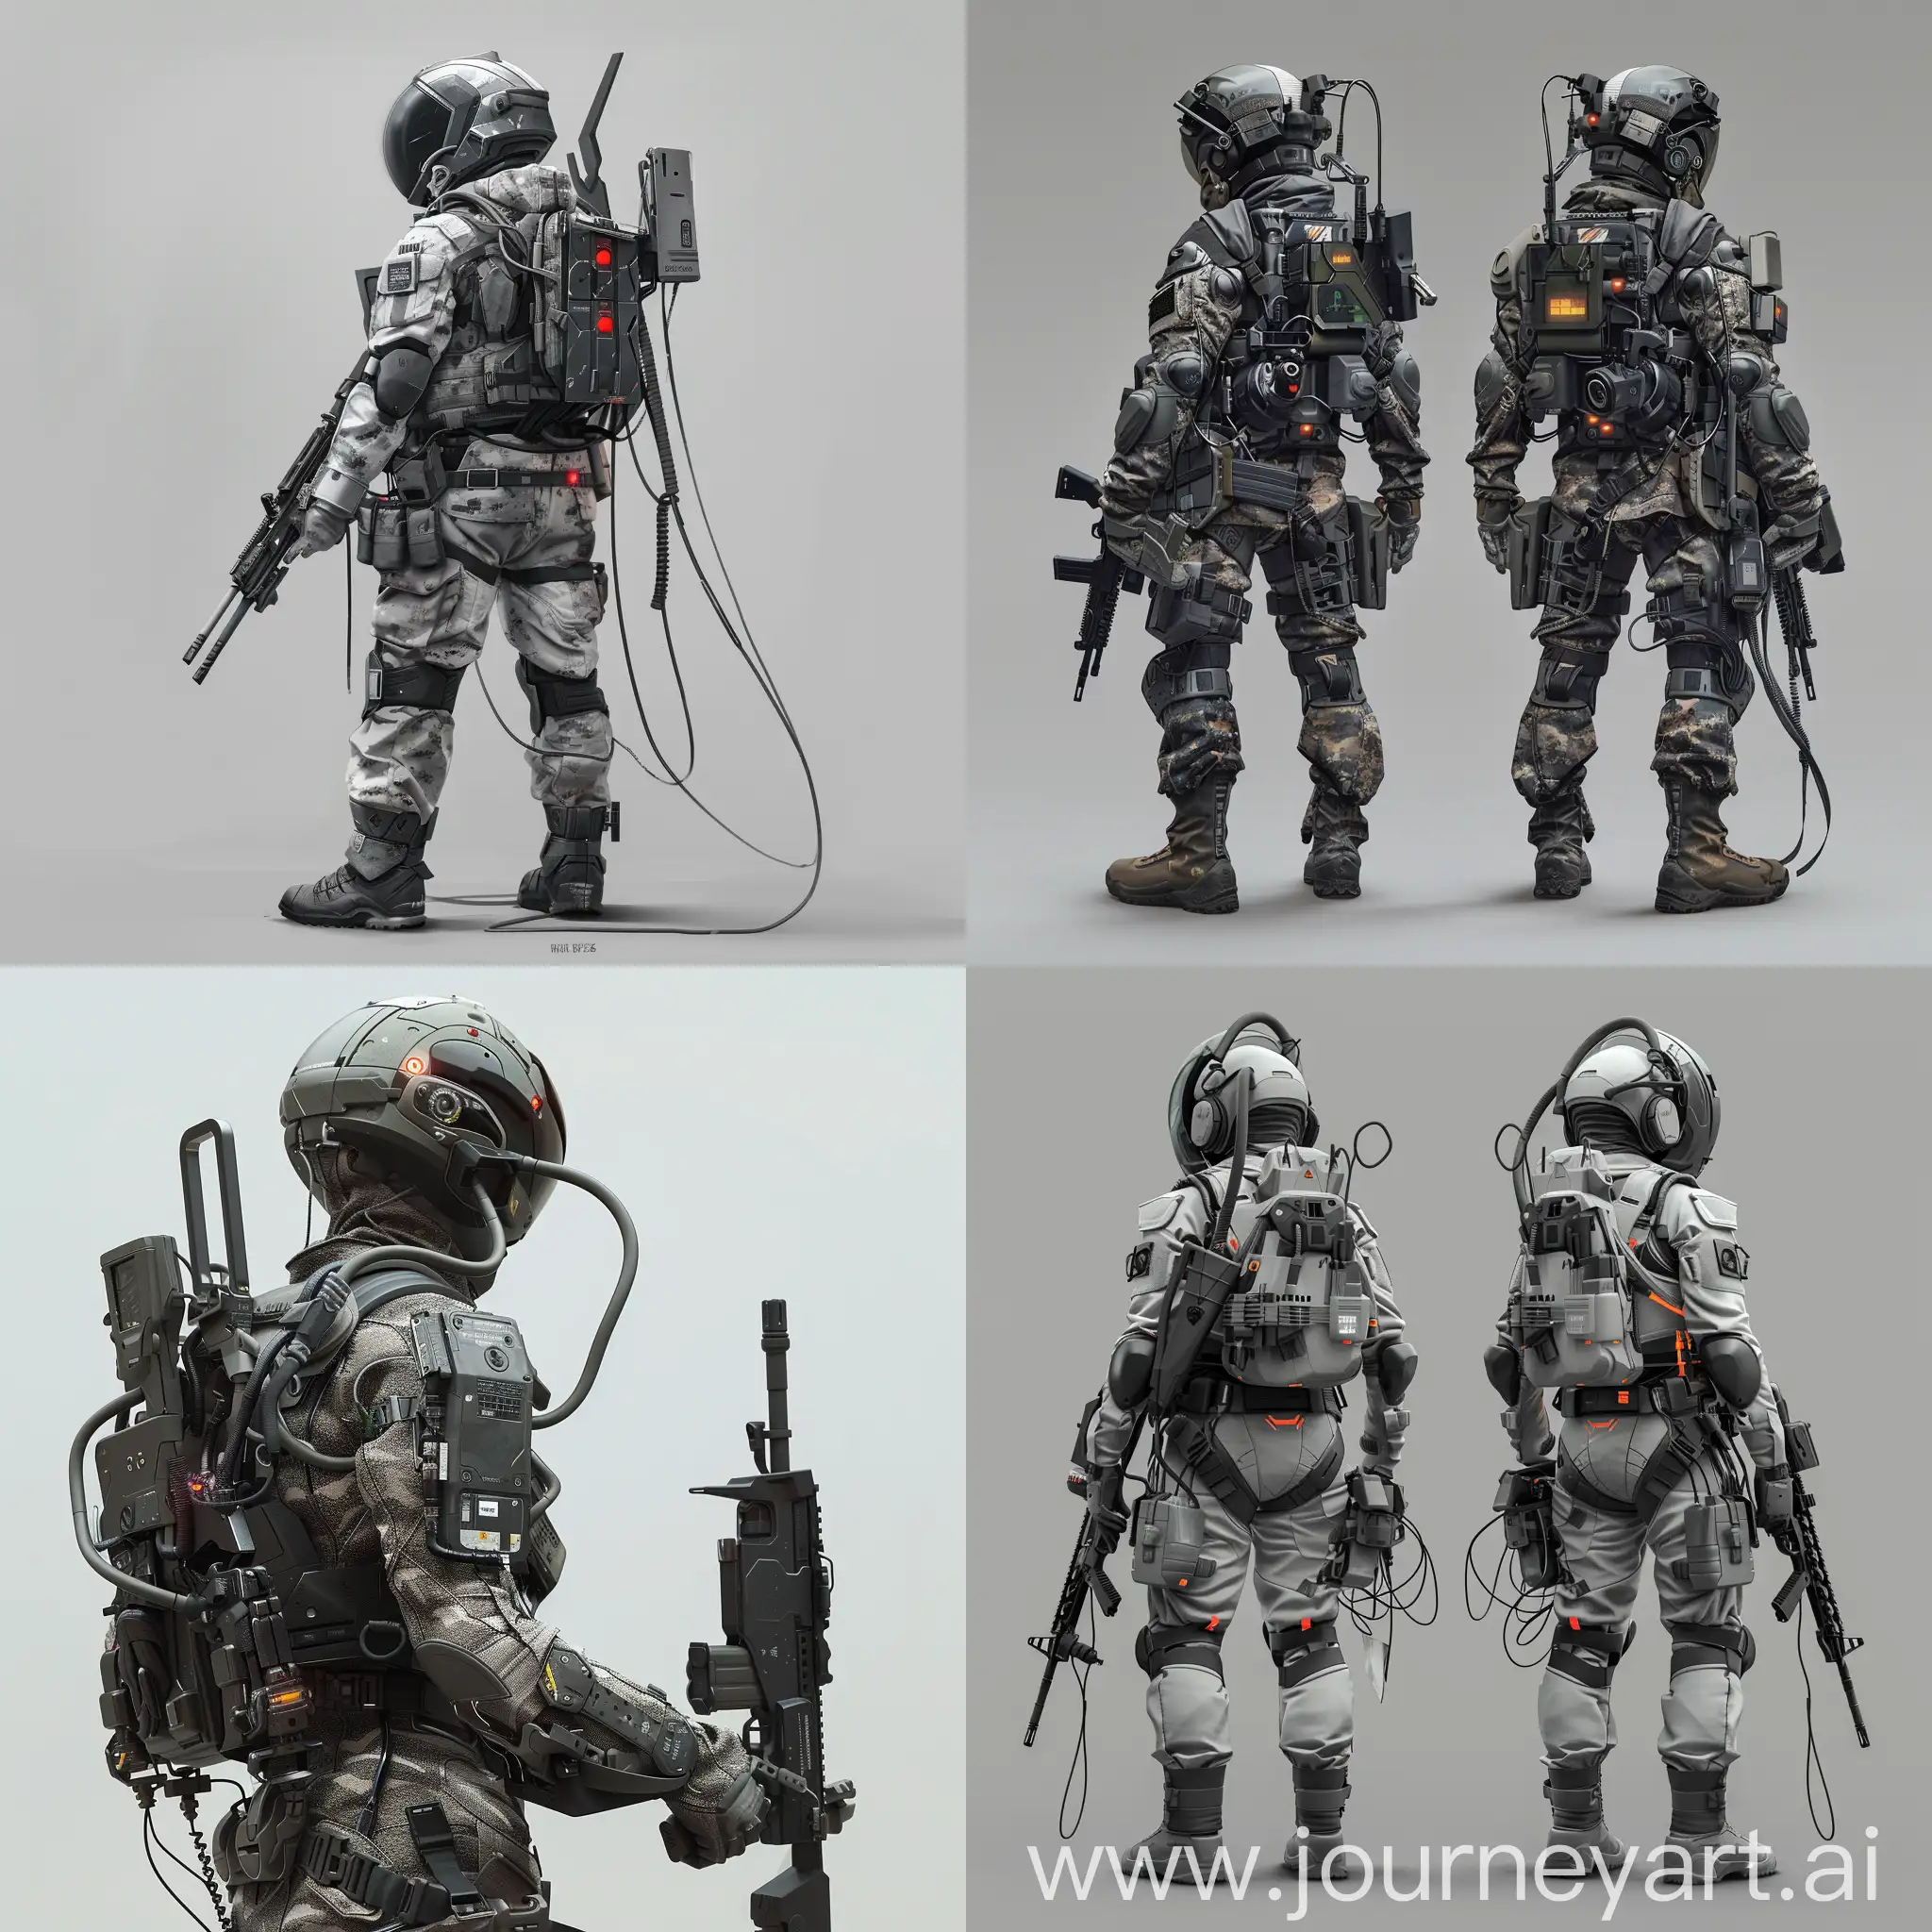 The future soldier is and lightly equipped, they wear no body armour apart from a helmet. They carry a short rifle. Their helmet has integrated communications. On their back is a power supply. Their uniform is designed to scare civilians.